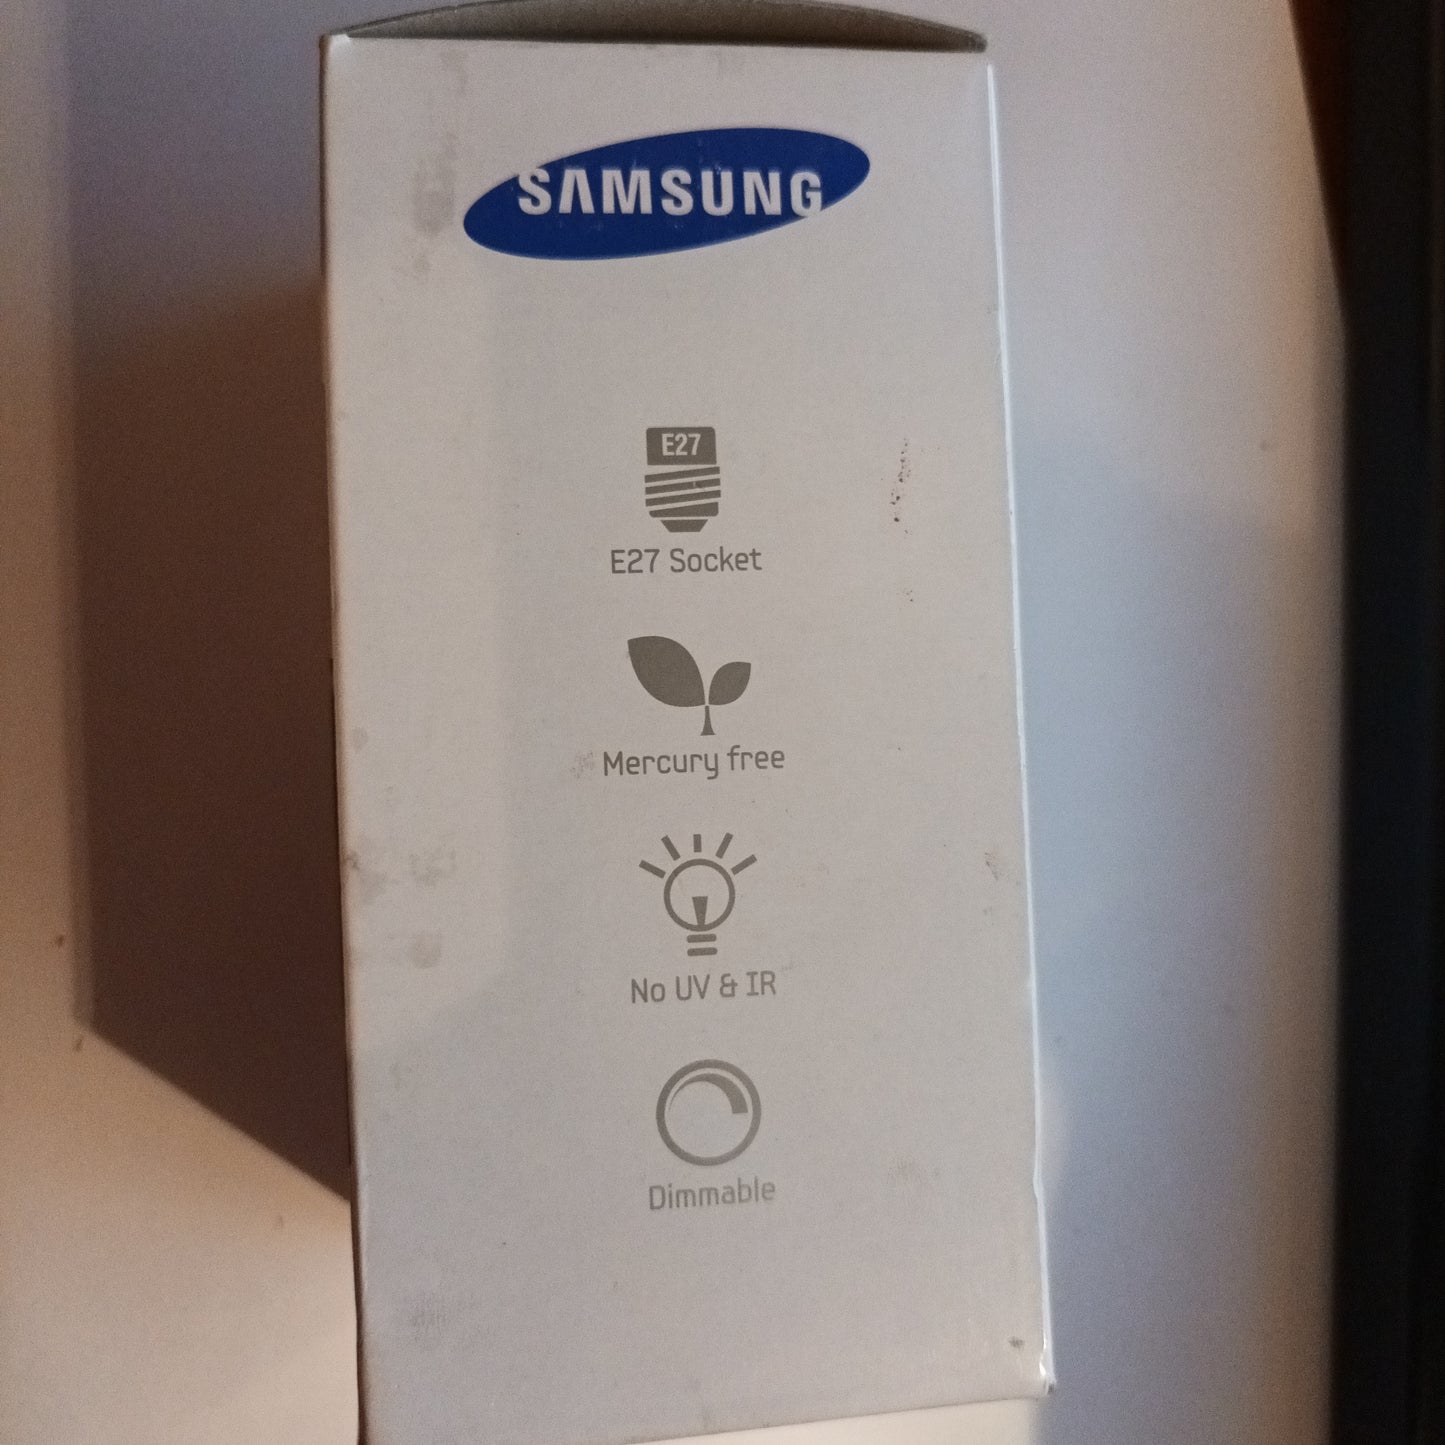 Samsung A60 LED GLS Lamp, E27, 11.3W = 60W Equiv 25000Hrs, Warm White Dimmable